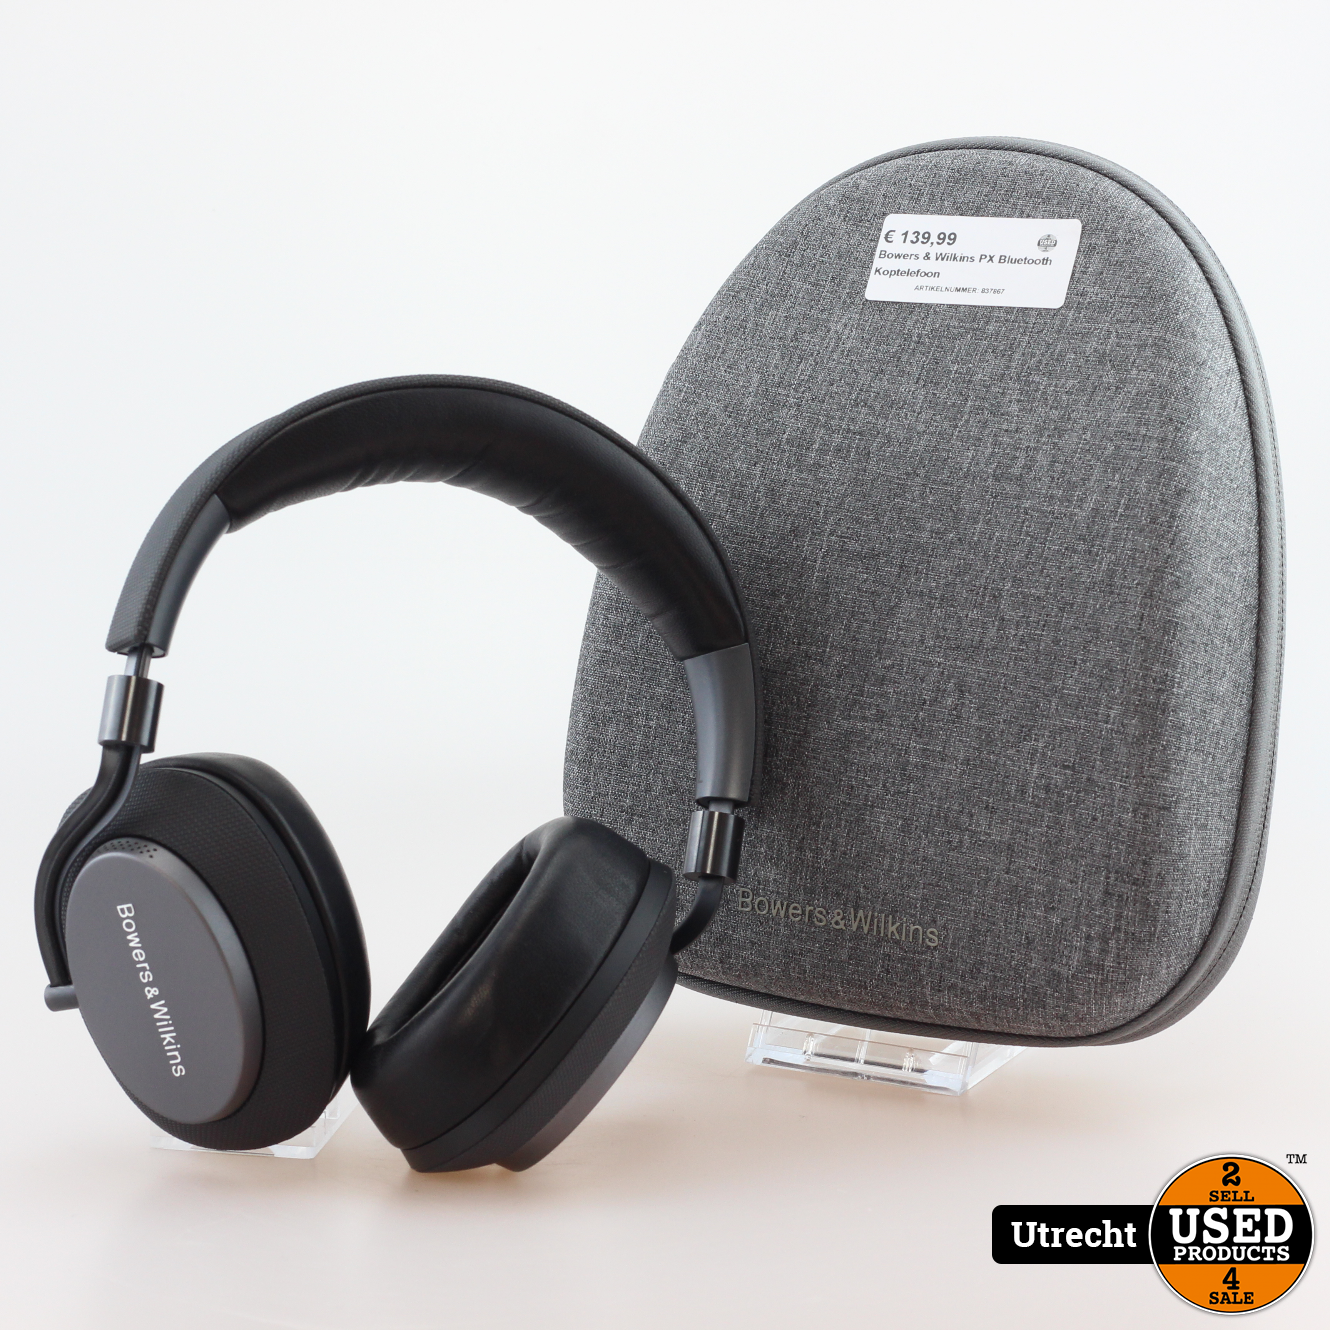 Bowers &amp; Wilkins PX Bluetooth - Used Products Utrecht